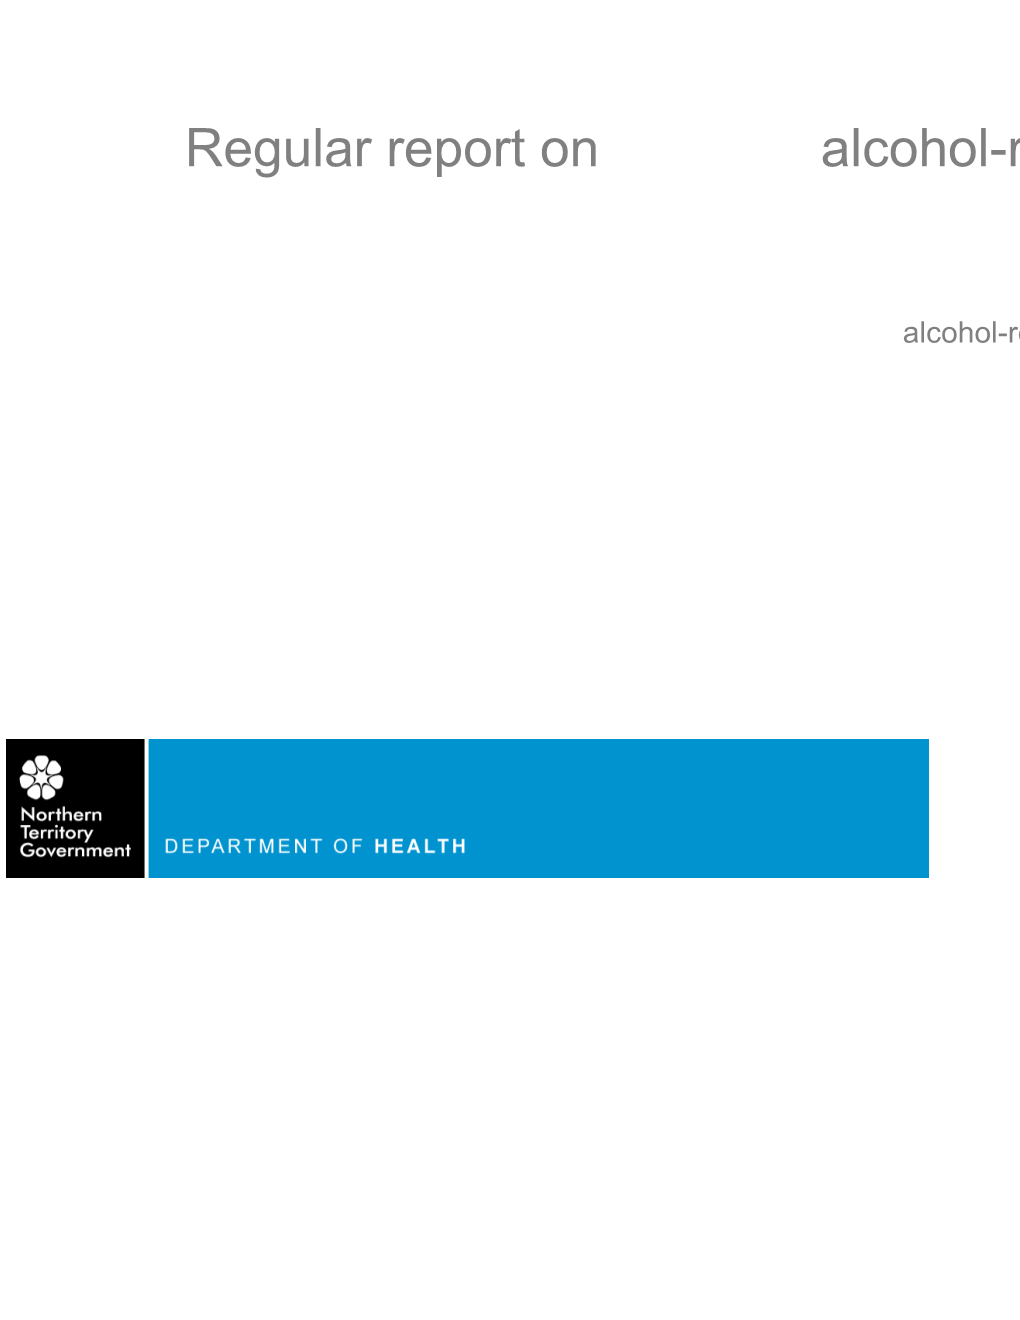 Regular Report on Alcohol-Related Harm Indicators for Public Hospitals